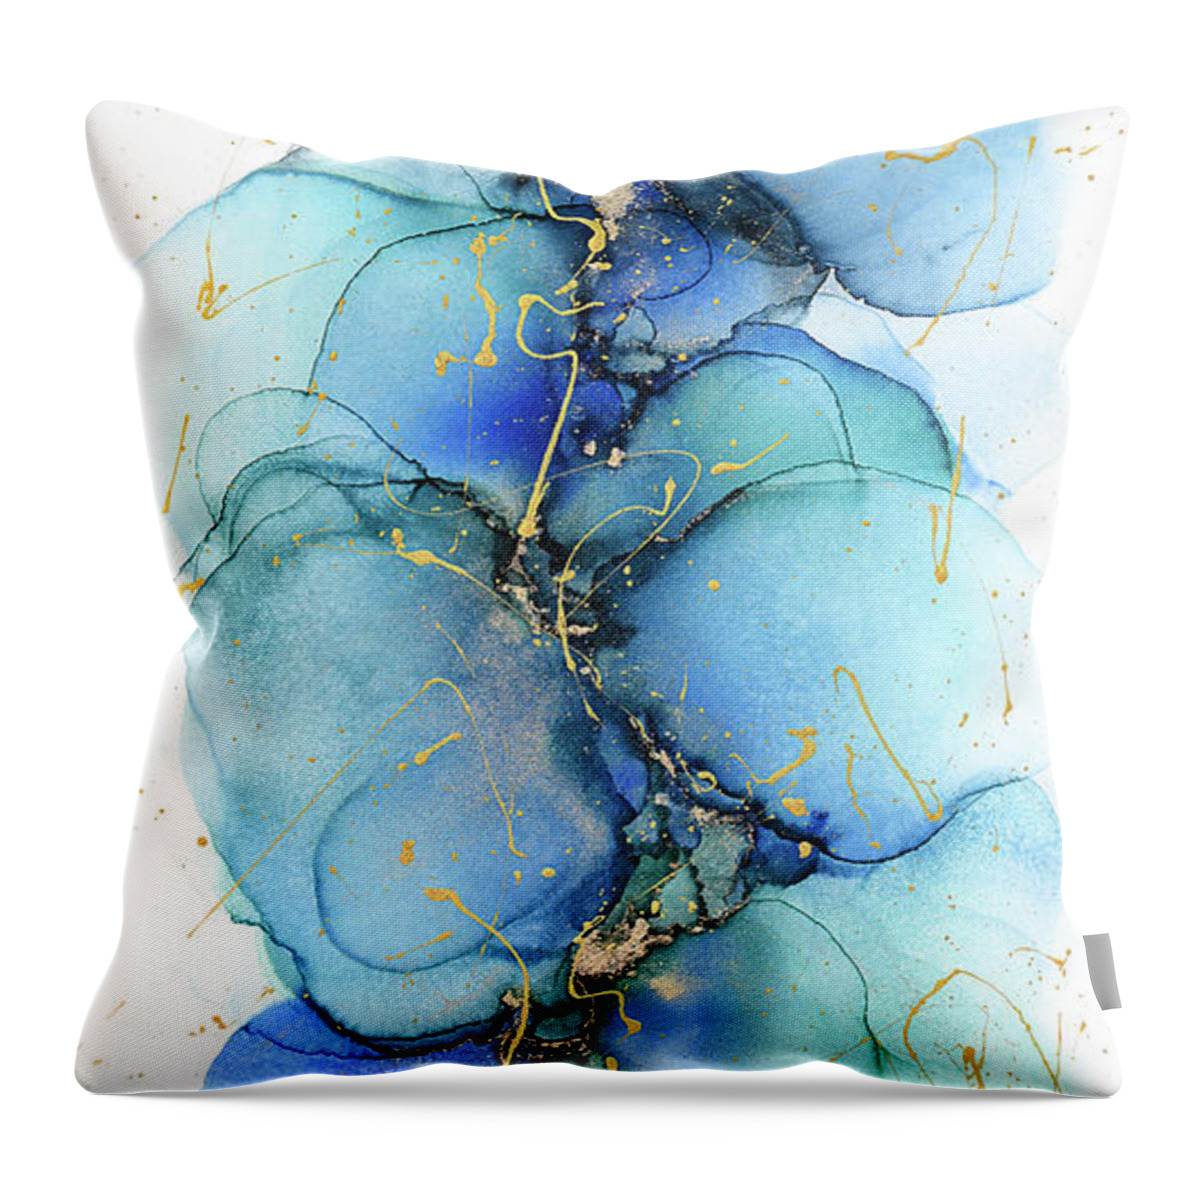 Alcohol Ink Throw Pillow featuring the painting Mixed Media Abstract Petals Painting by Alissa Beth Photography